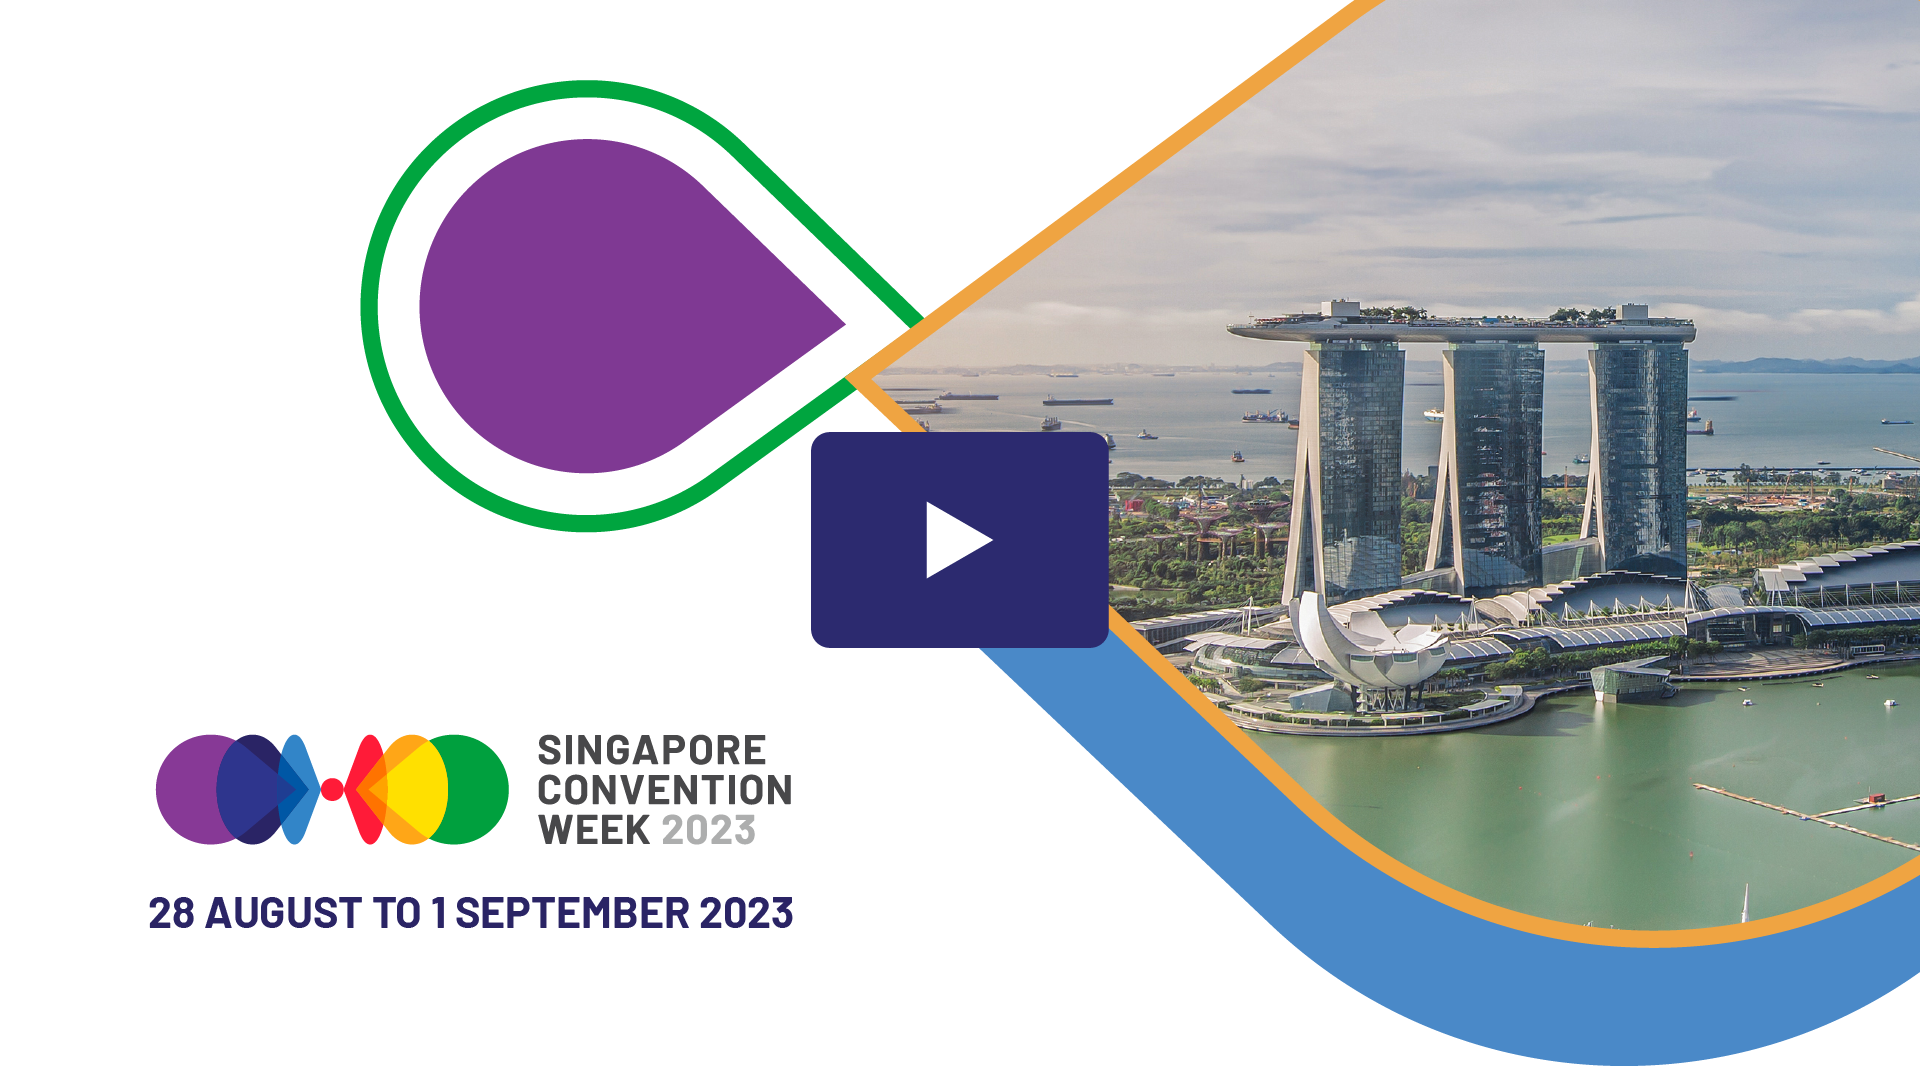 Singapore Convention Week 2023: Event Highlights